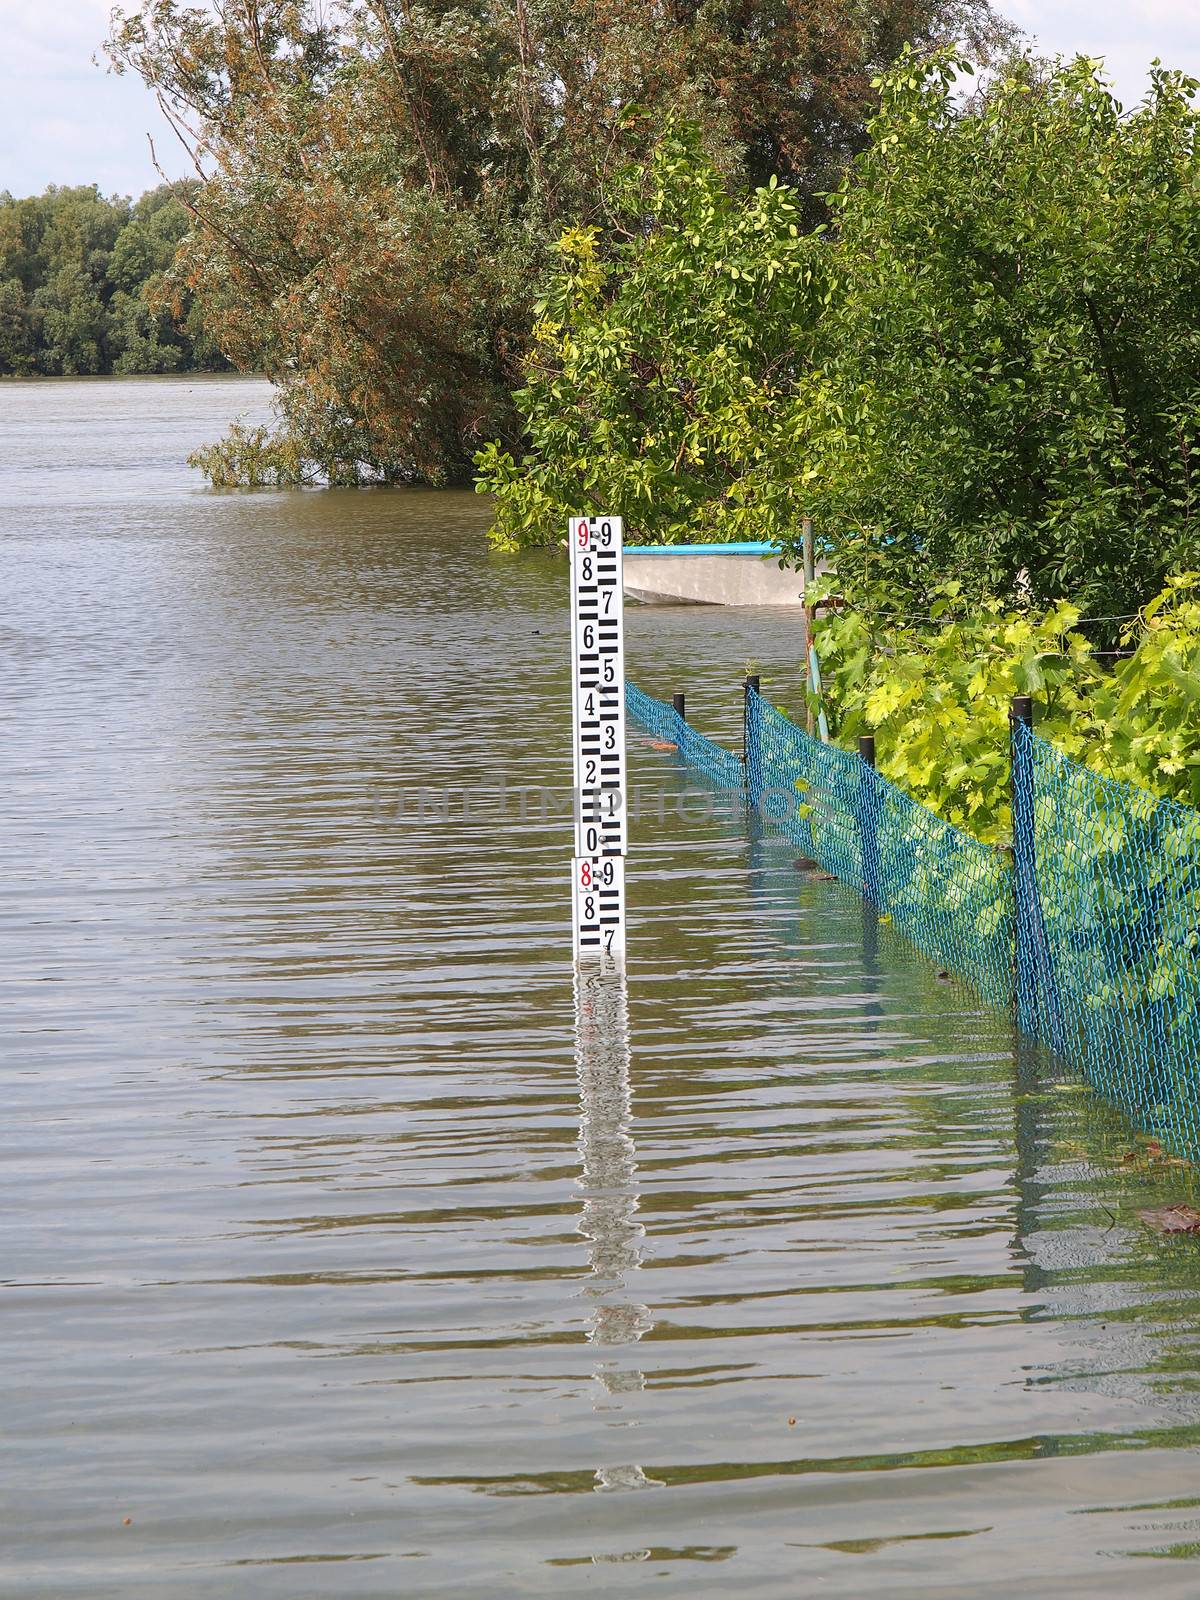 Depth marker indicating the depth of water in a potential flooded area.     